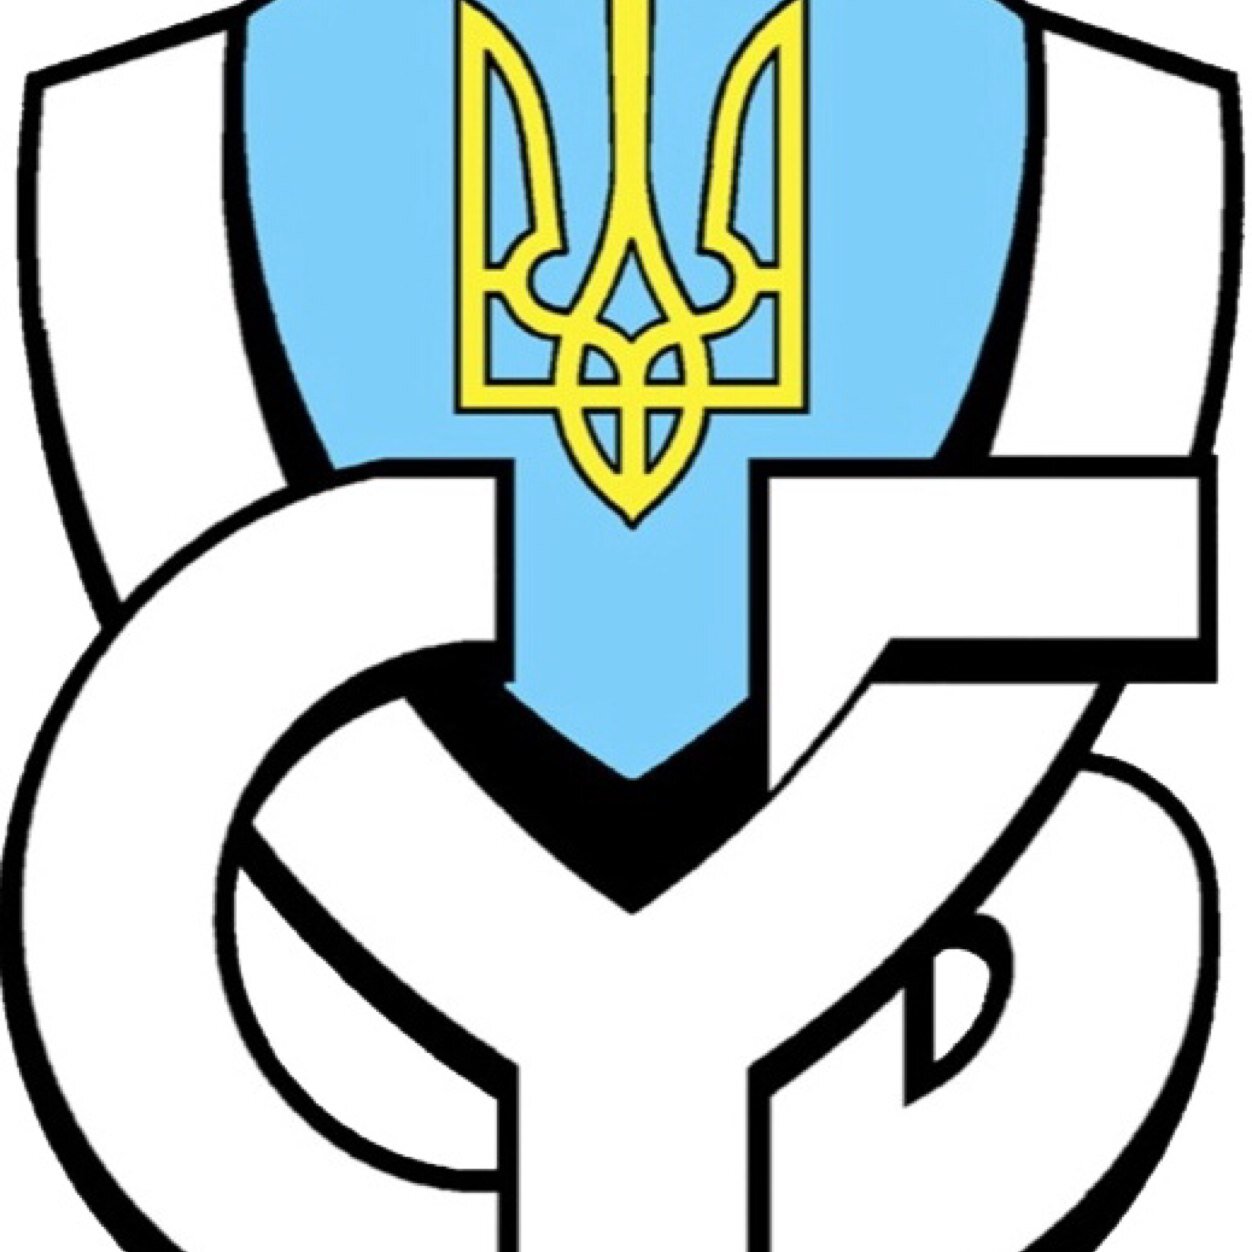 The largest representative body for those of Ukrainian descent in GB. We promote and develop the interests of the Ukrainian community. See our website for more.